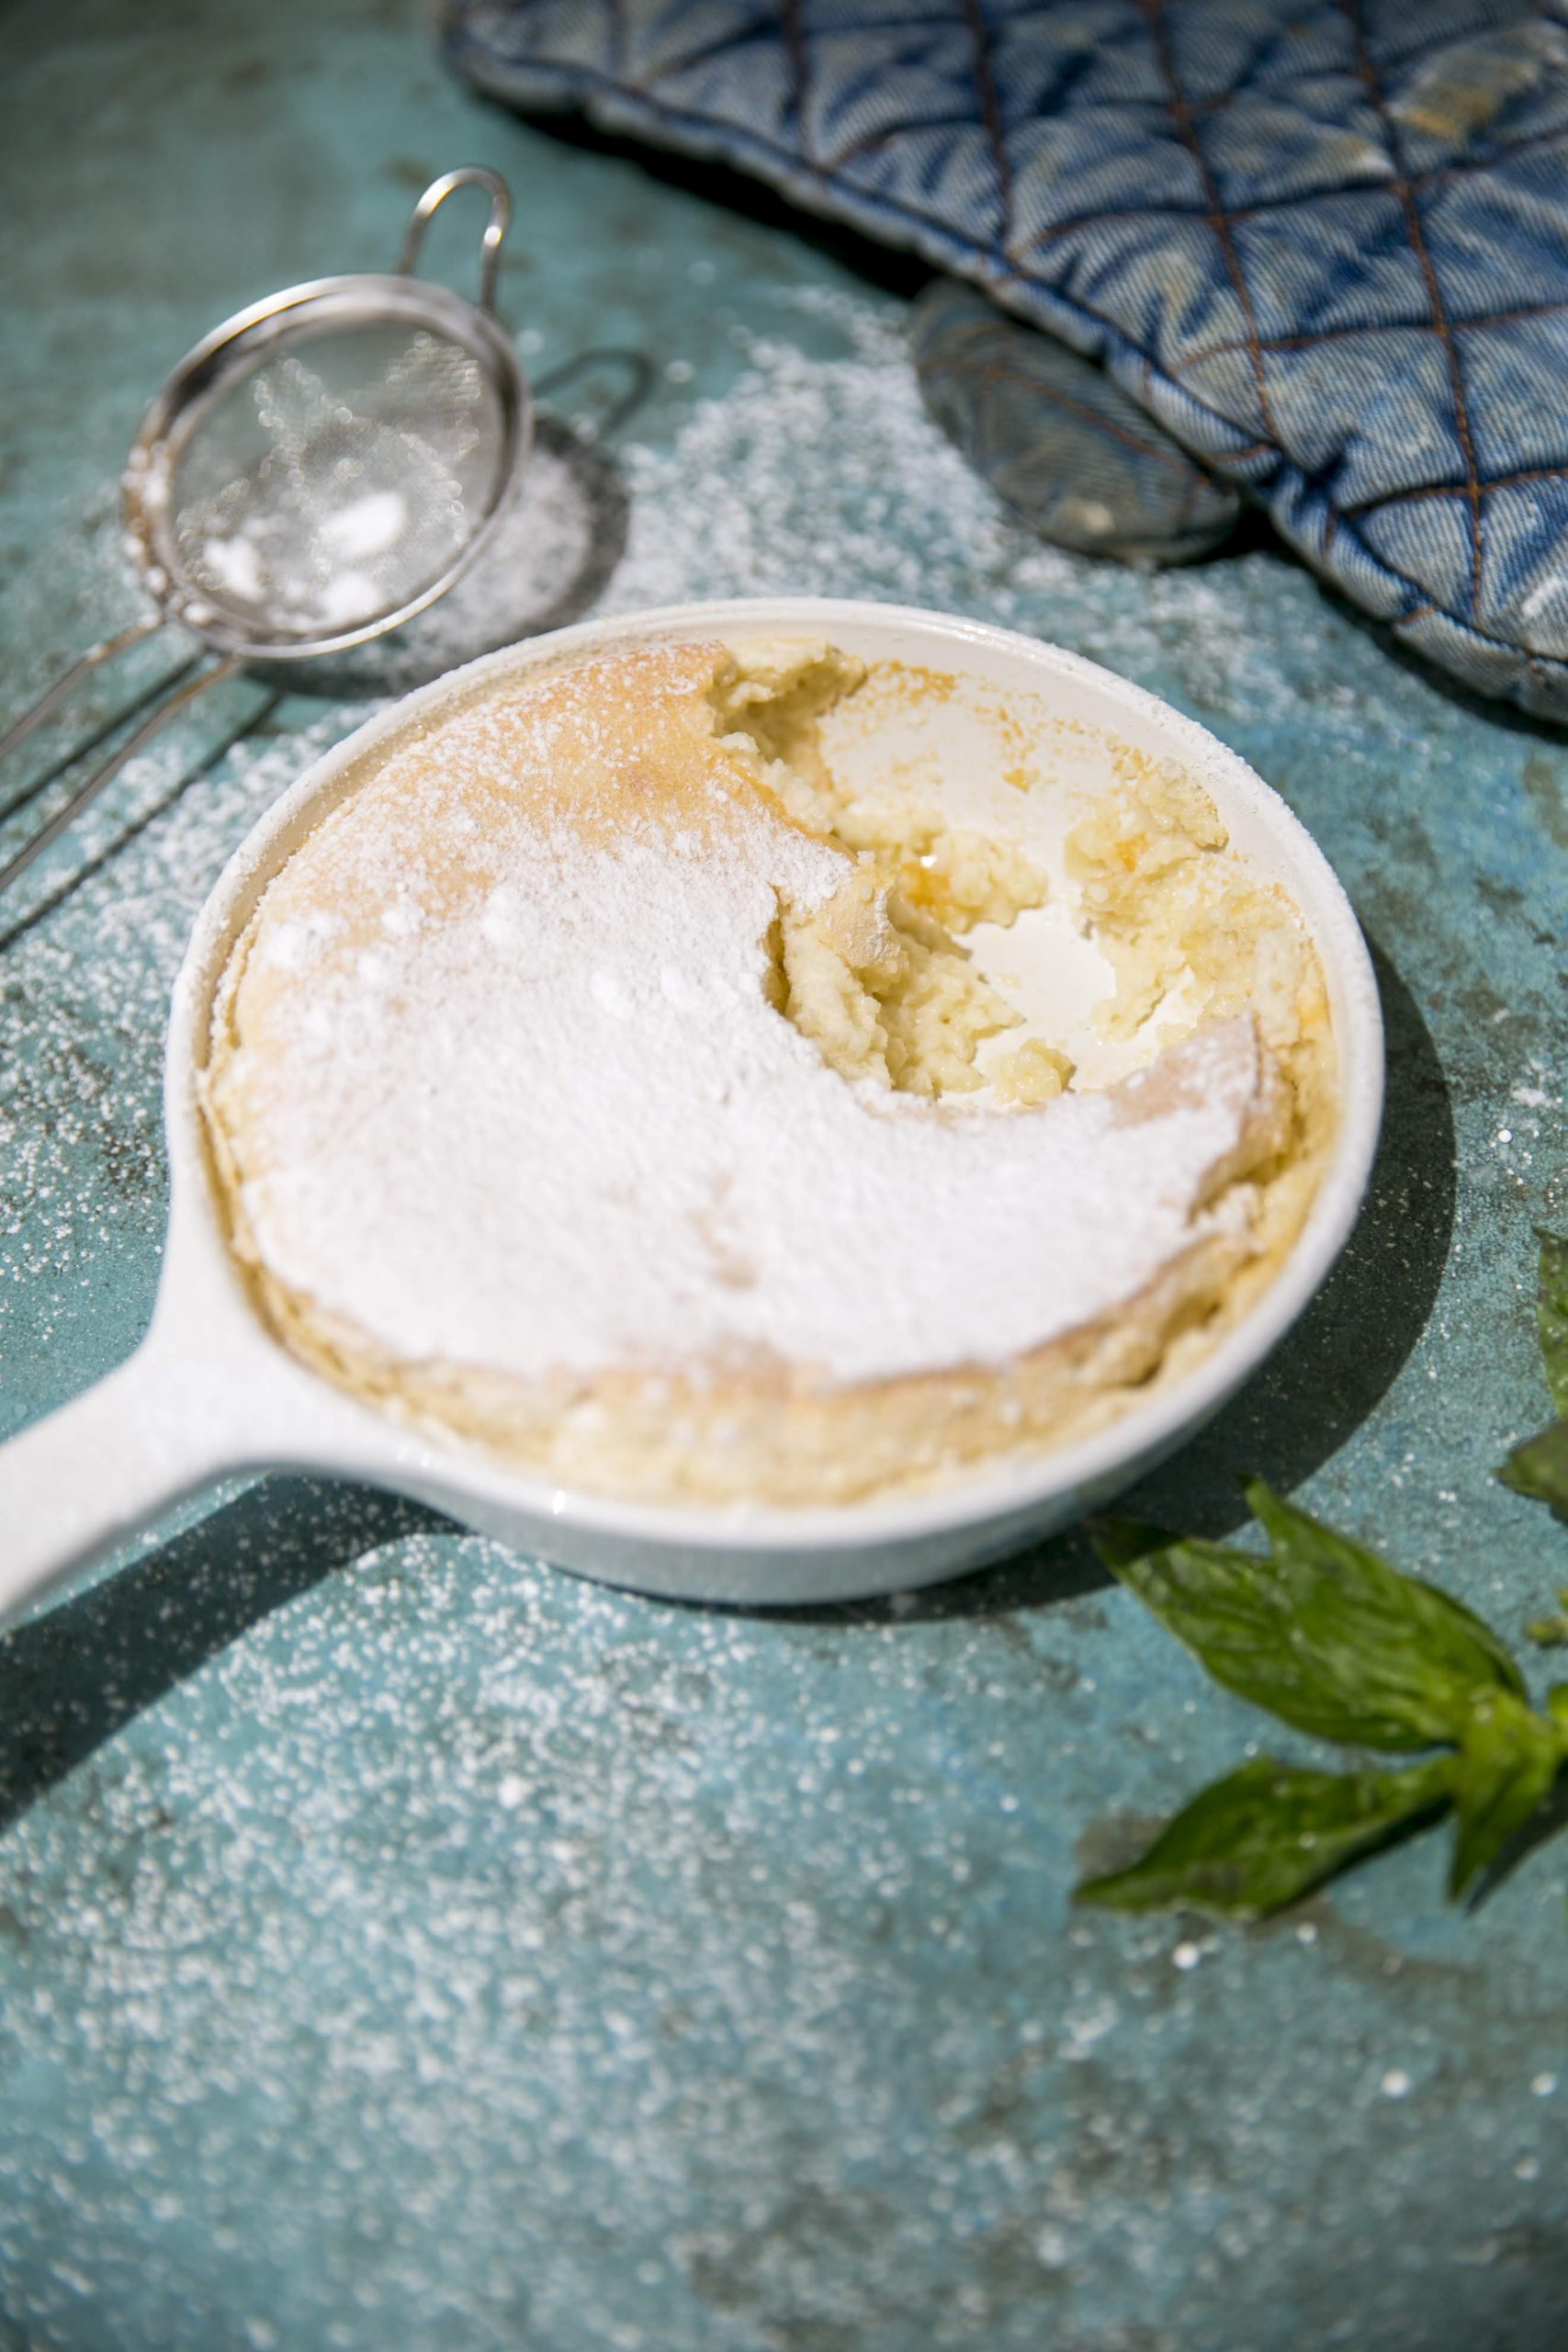 Impress Your Friends With This Gorgeous Vanilla Basil Soufflé